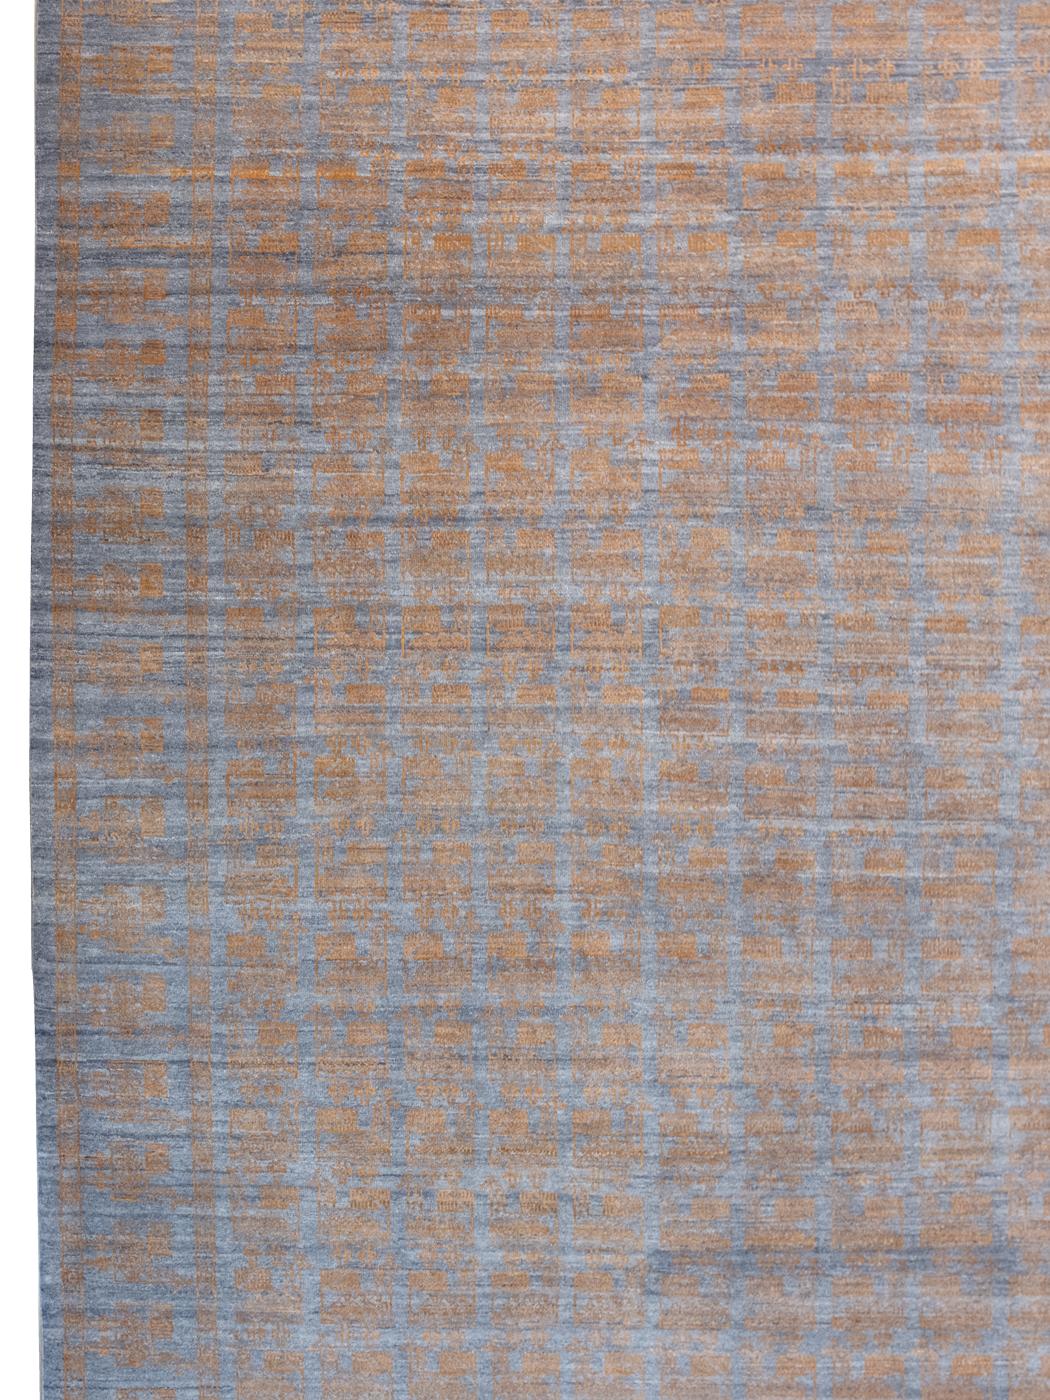 Vegetable Dyed Orley Shabahang, Orange and Gray Modern Peacock Carpet, Wool, 9' x 12' For Sale